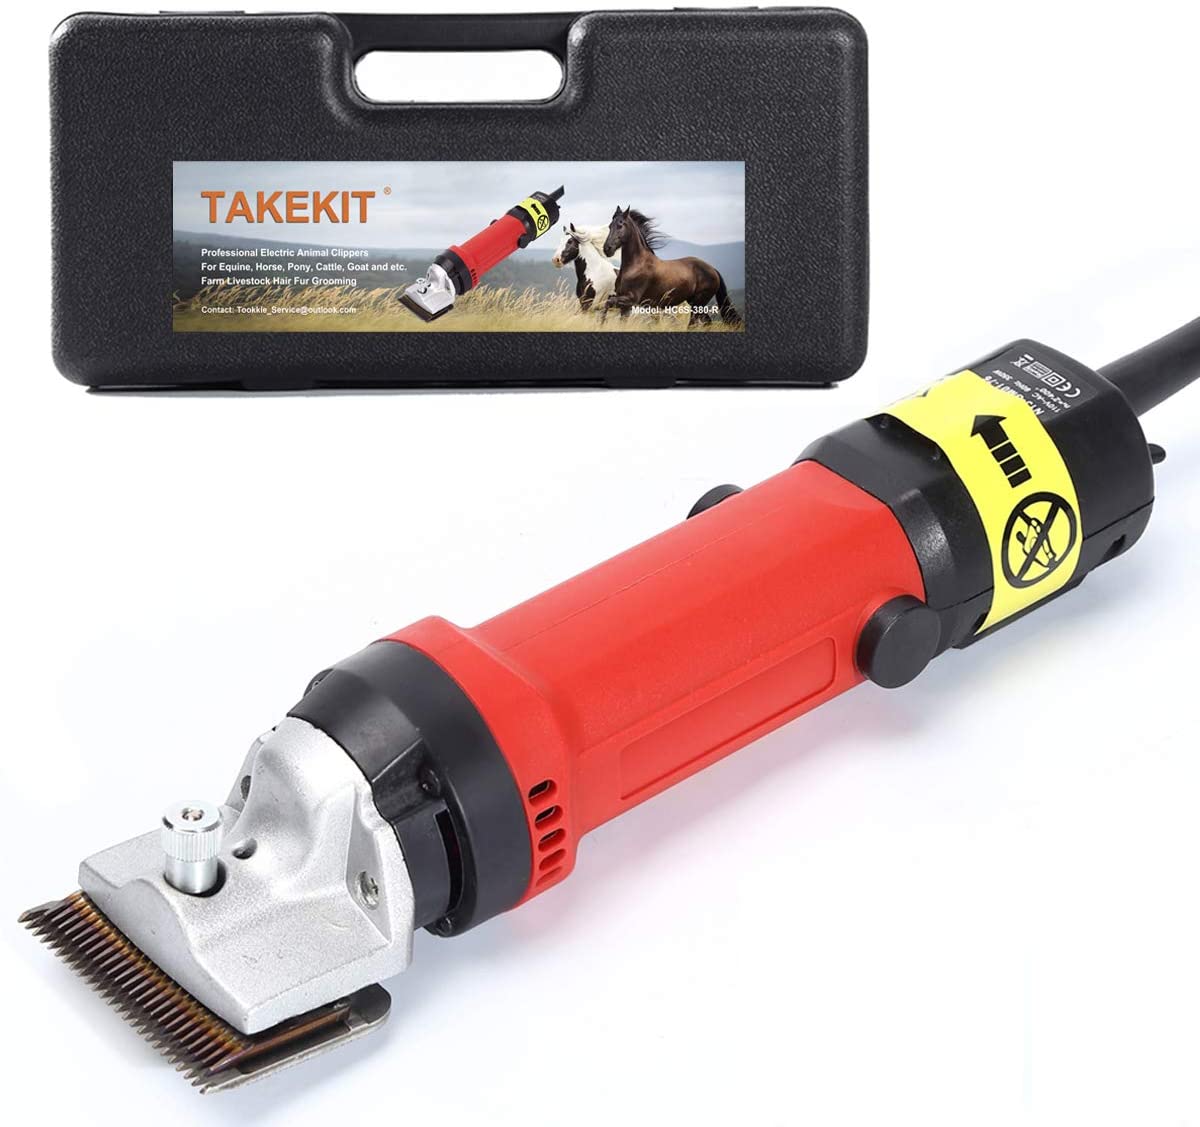 TAKEKIT Horse Clippers Professional Grooming Kit